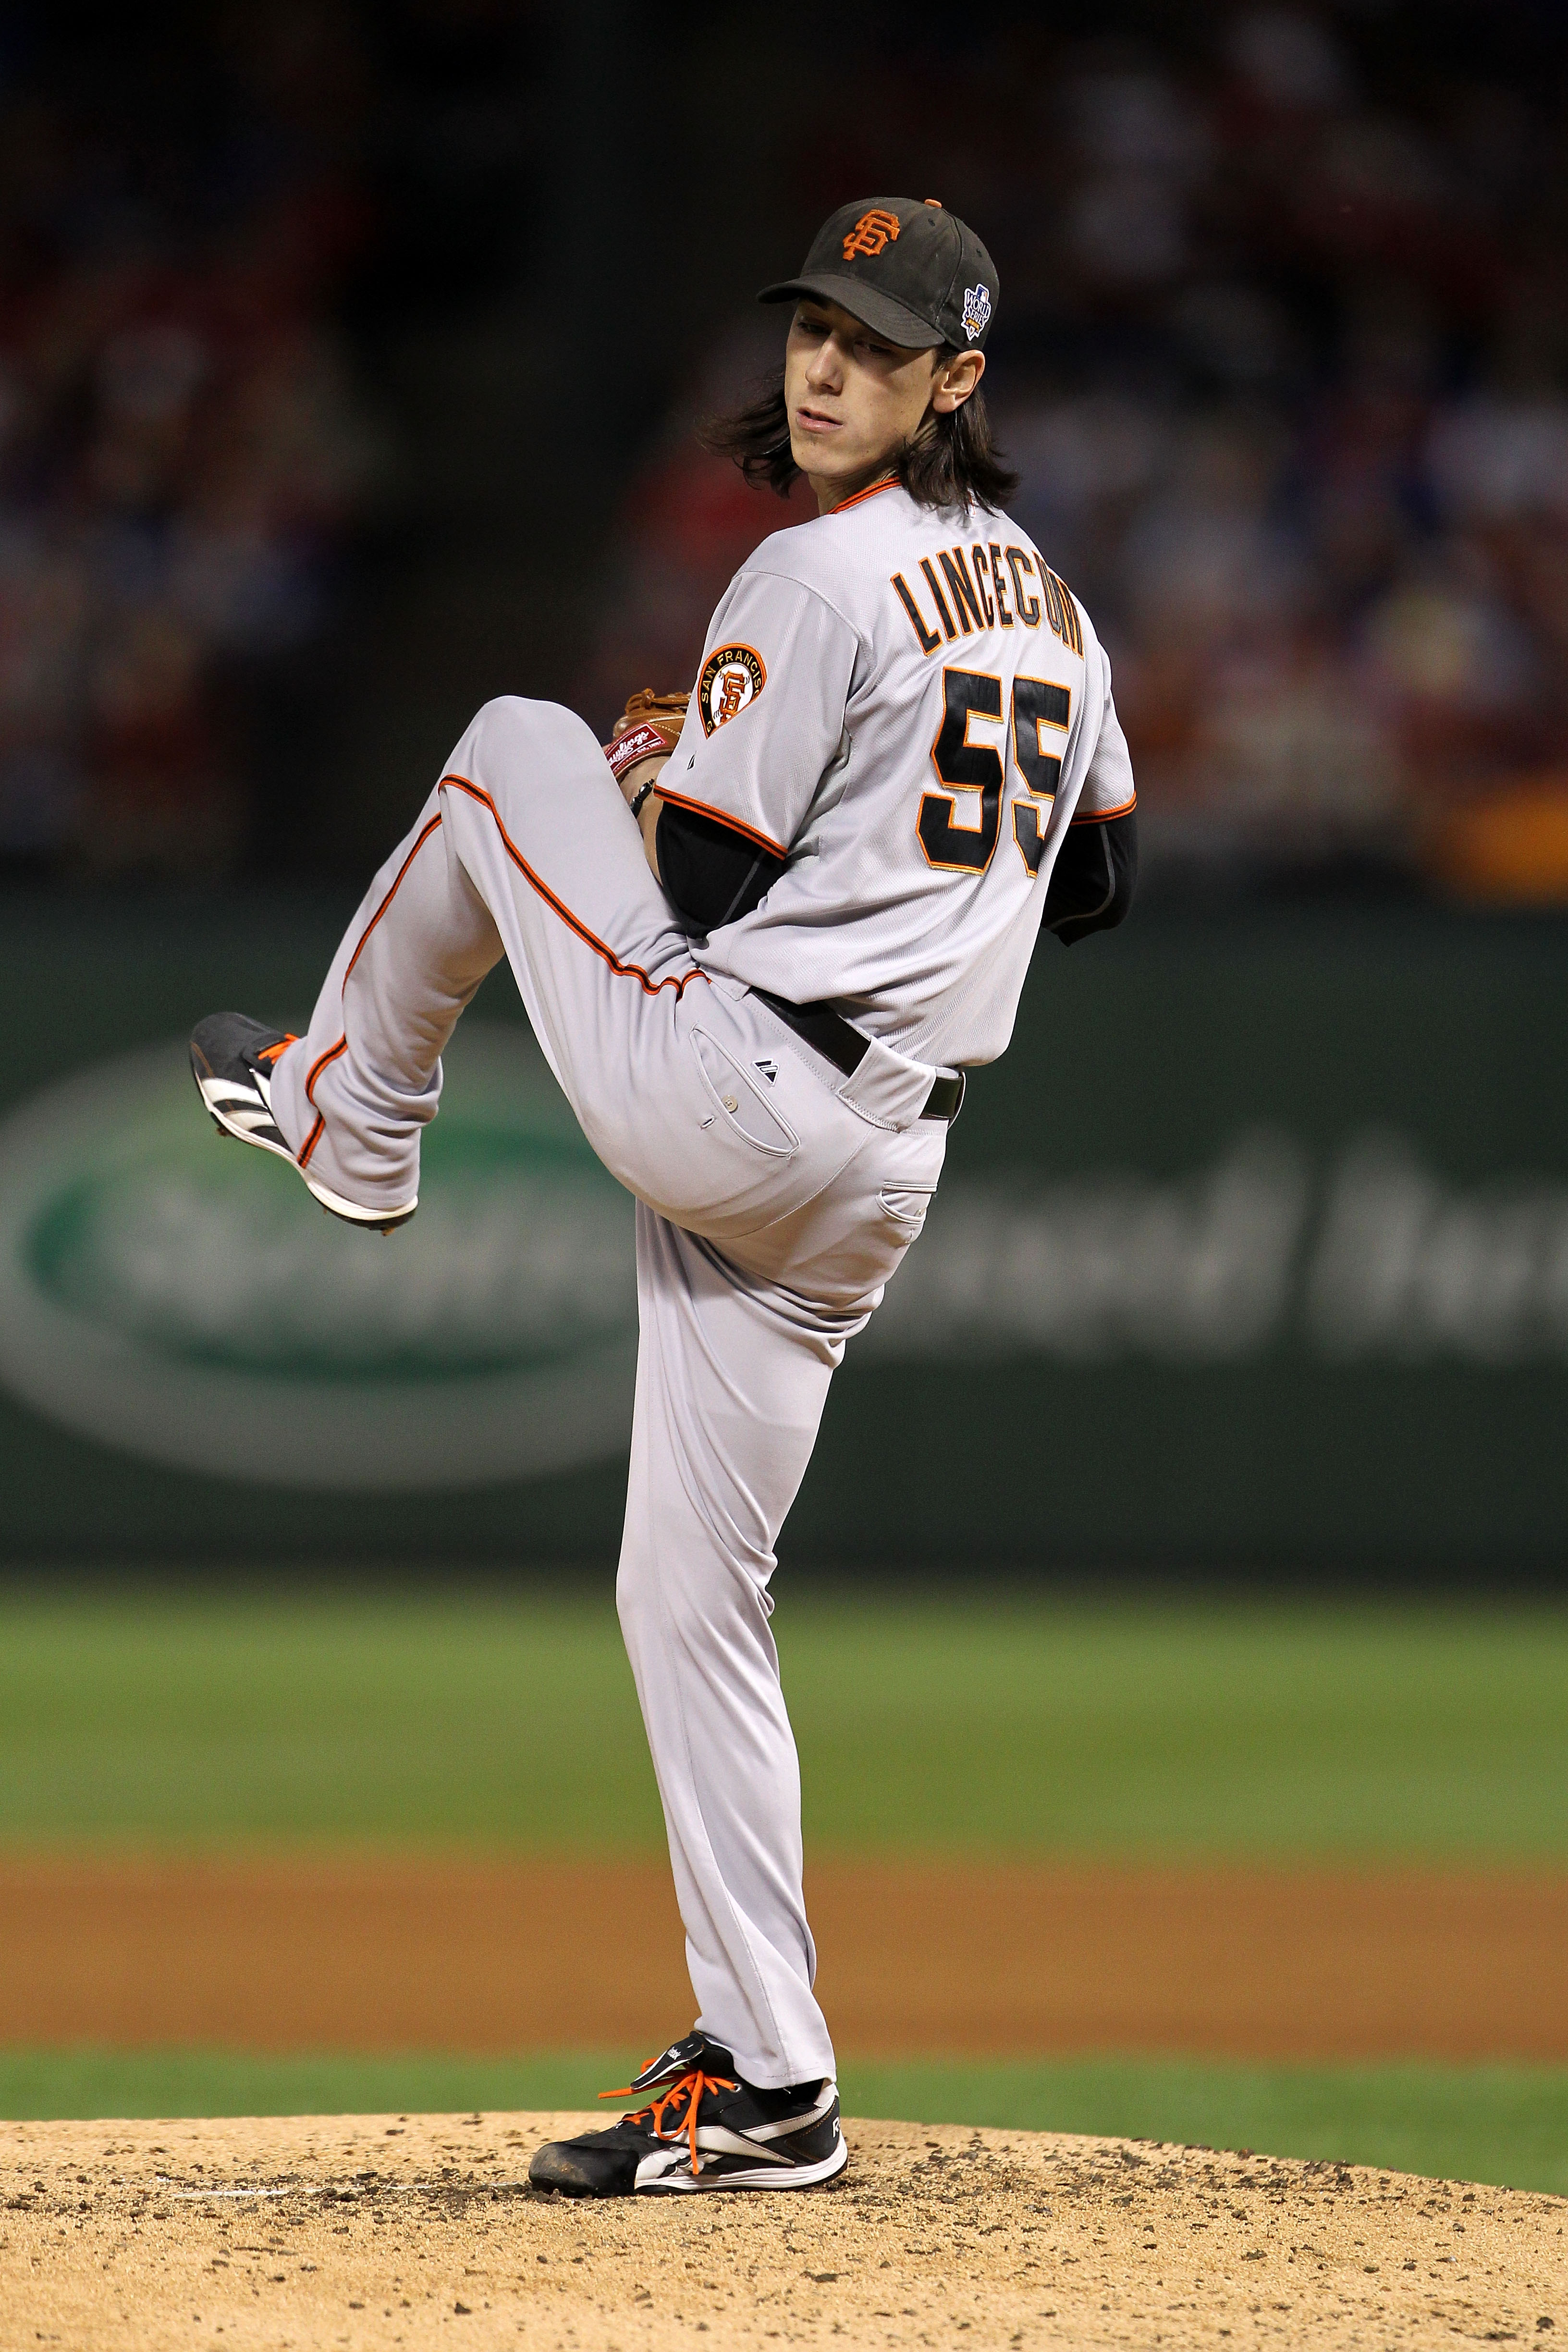 Tim Lincecum is making a comeback (and is also jacked now